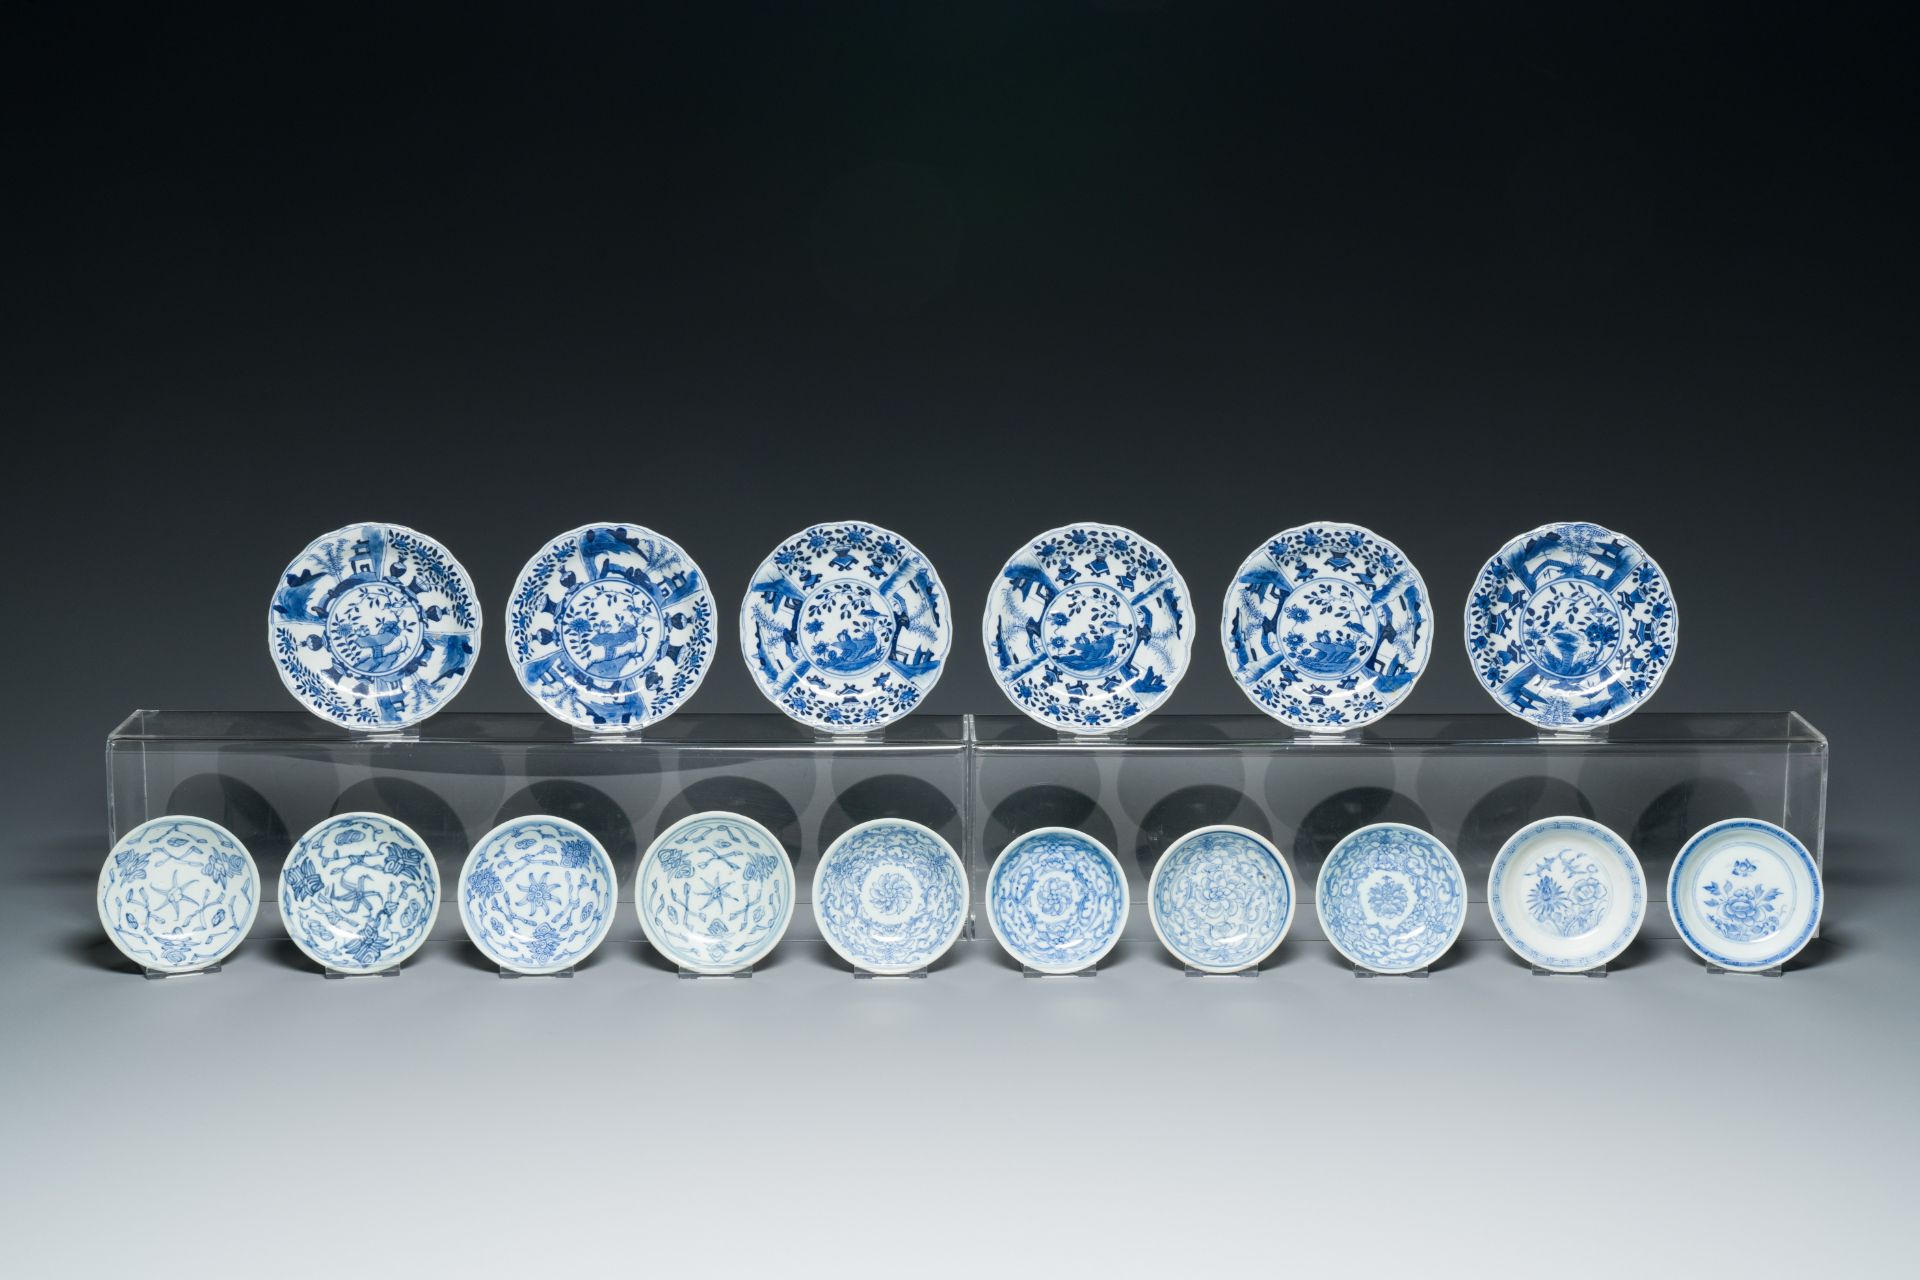 A varied collection of Chinese porcelain, 18/19th C. - Image 2 of 18